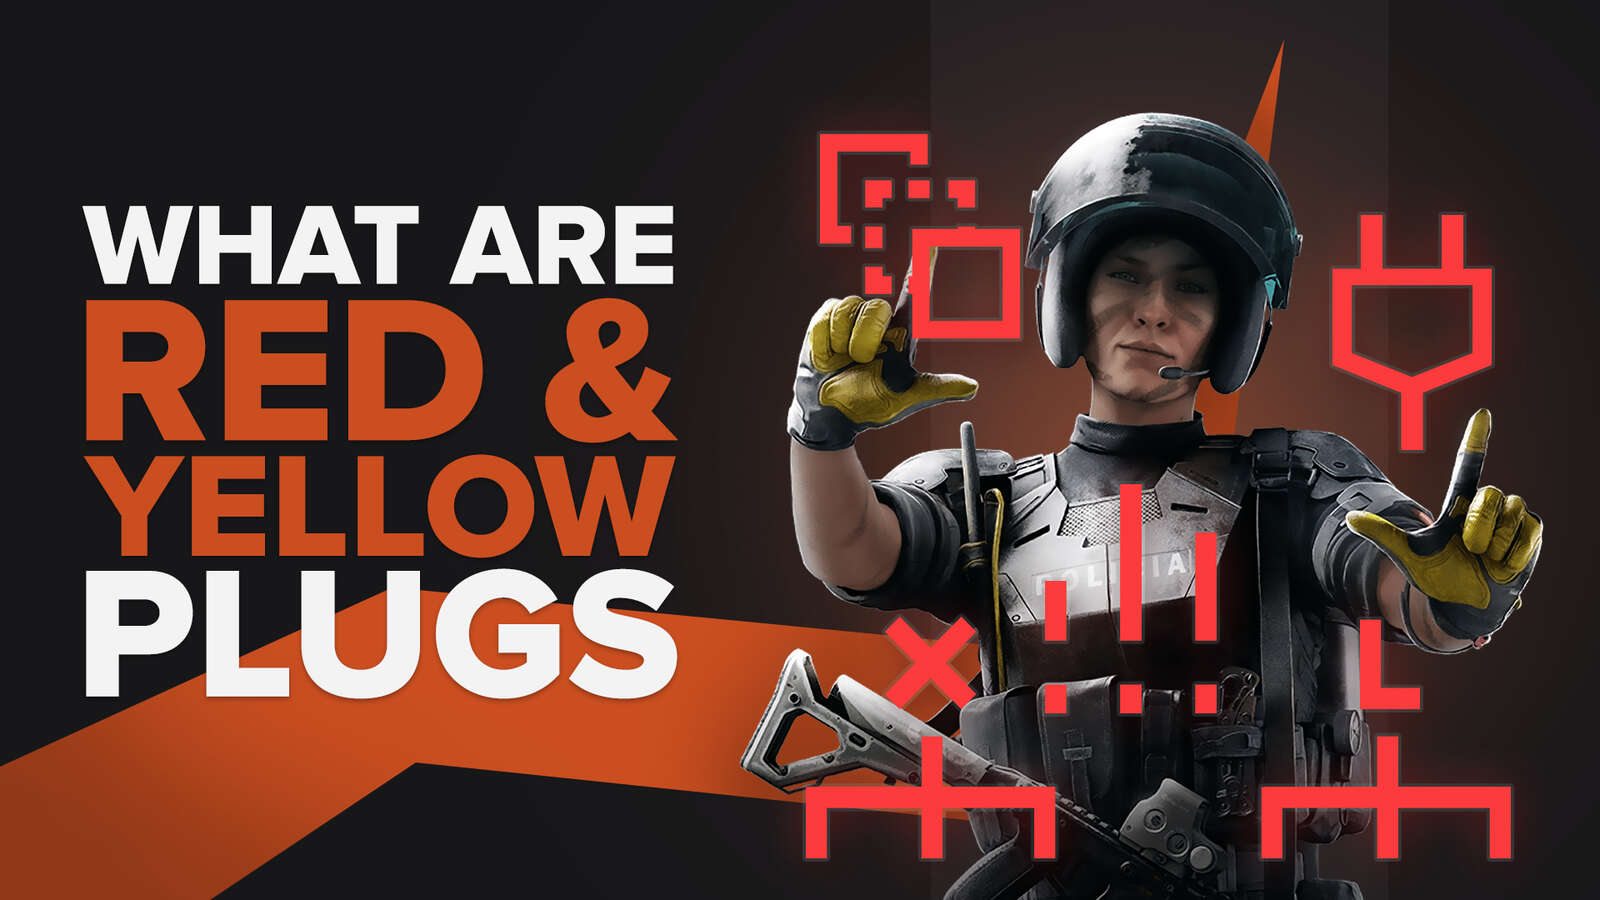 Rainbow Six Siege: What Do the Red & Yellow Plugs Mean?